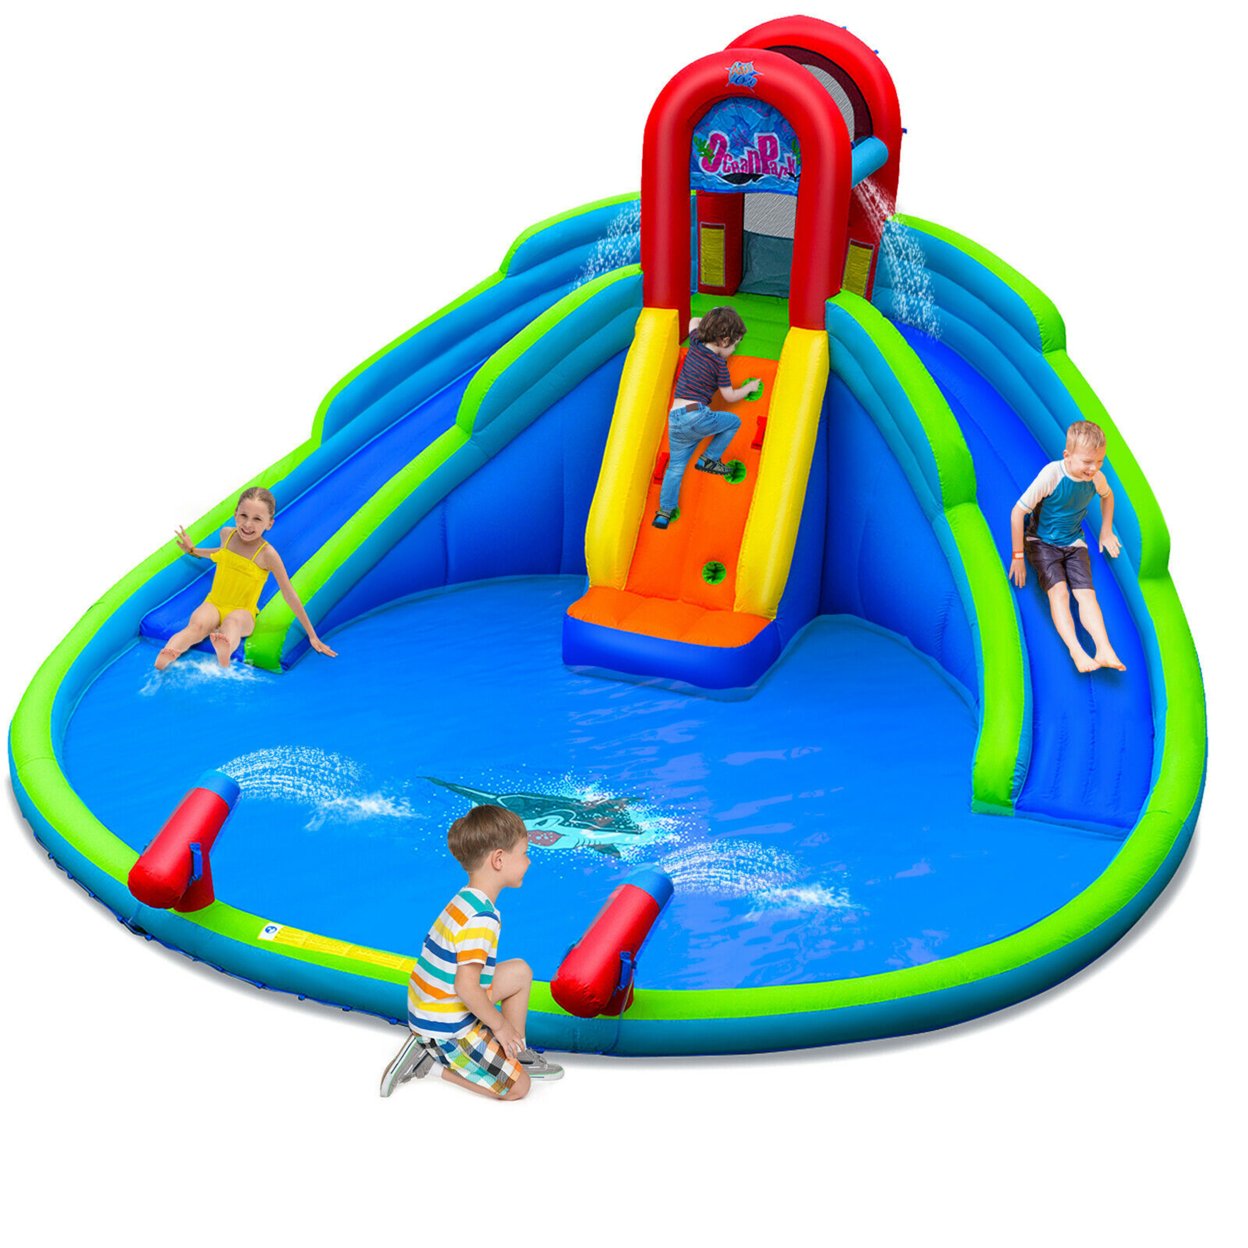 Gymax Inflatable Waterslide Wet and Dry Bounce House w/Upgraded Handrail Blower Excluded